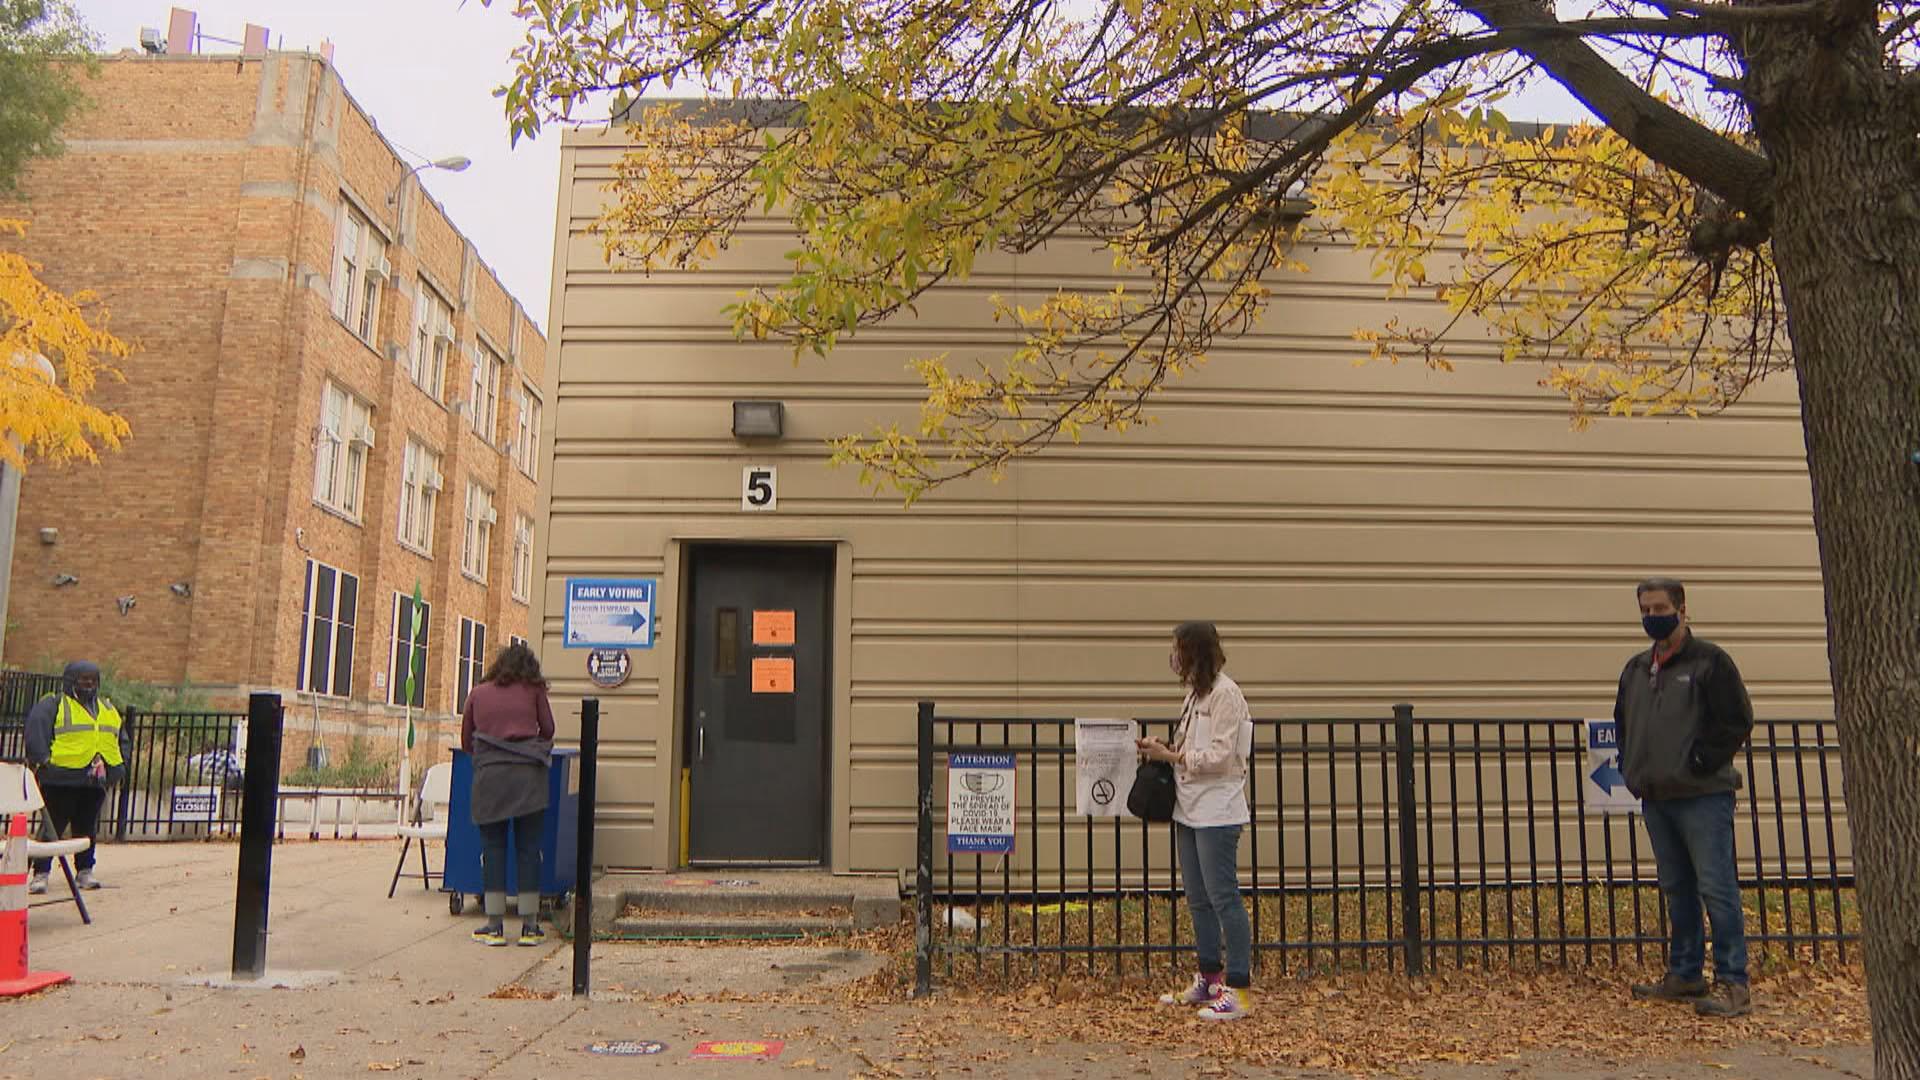 People line up for early voting in Chicago on Wednesday, Oct. 14, 2020. Amid the pandemic, many residents in the city and state have requested mail-in ballots for the Nov. 3 election. (WTTW News)